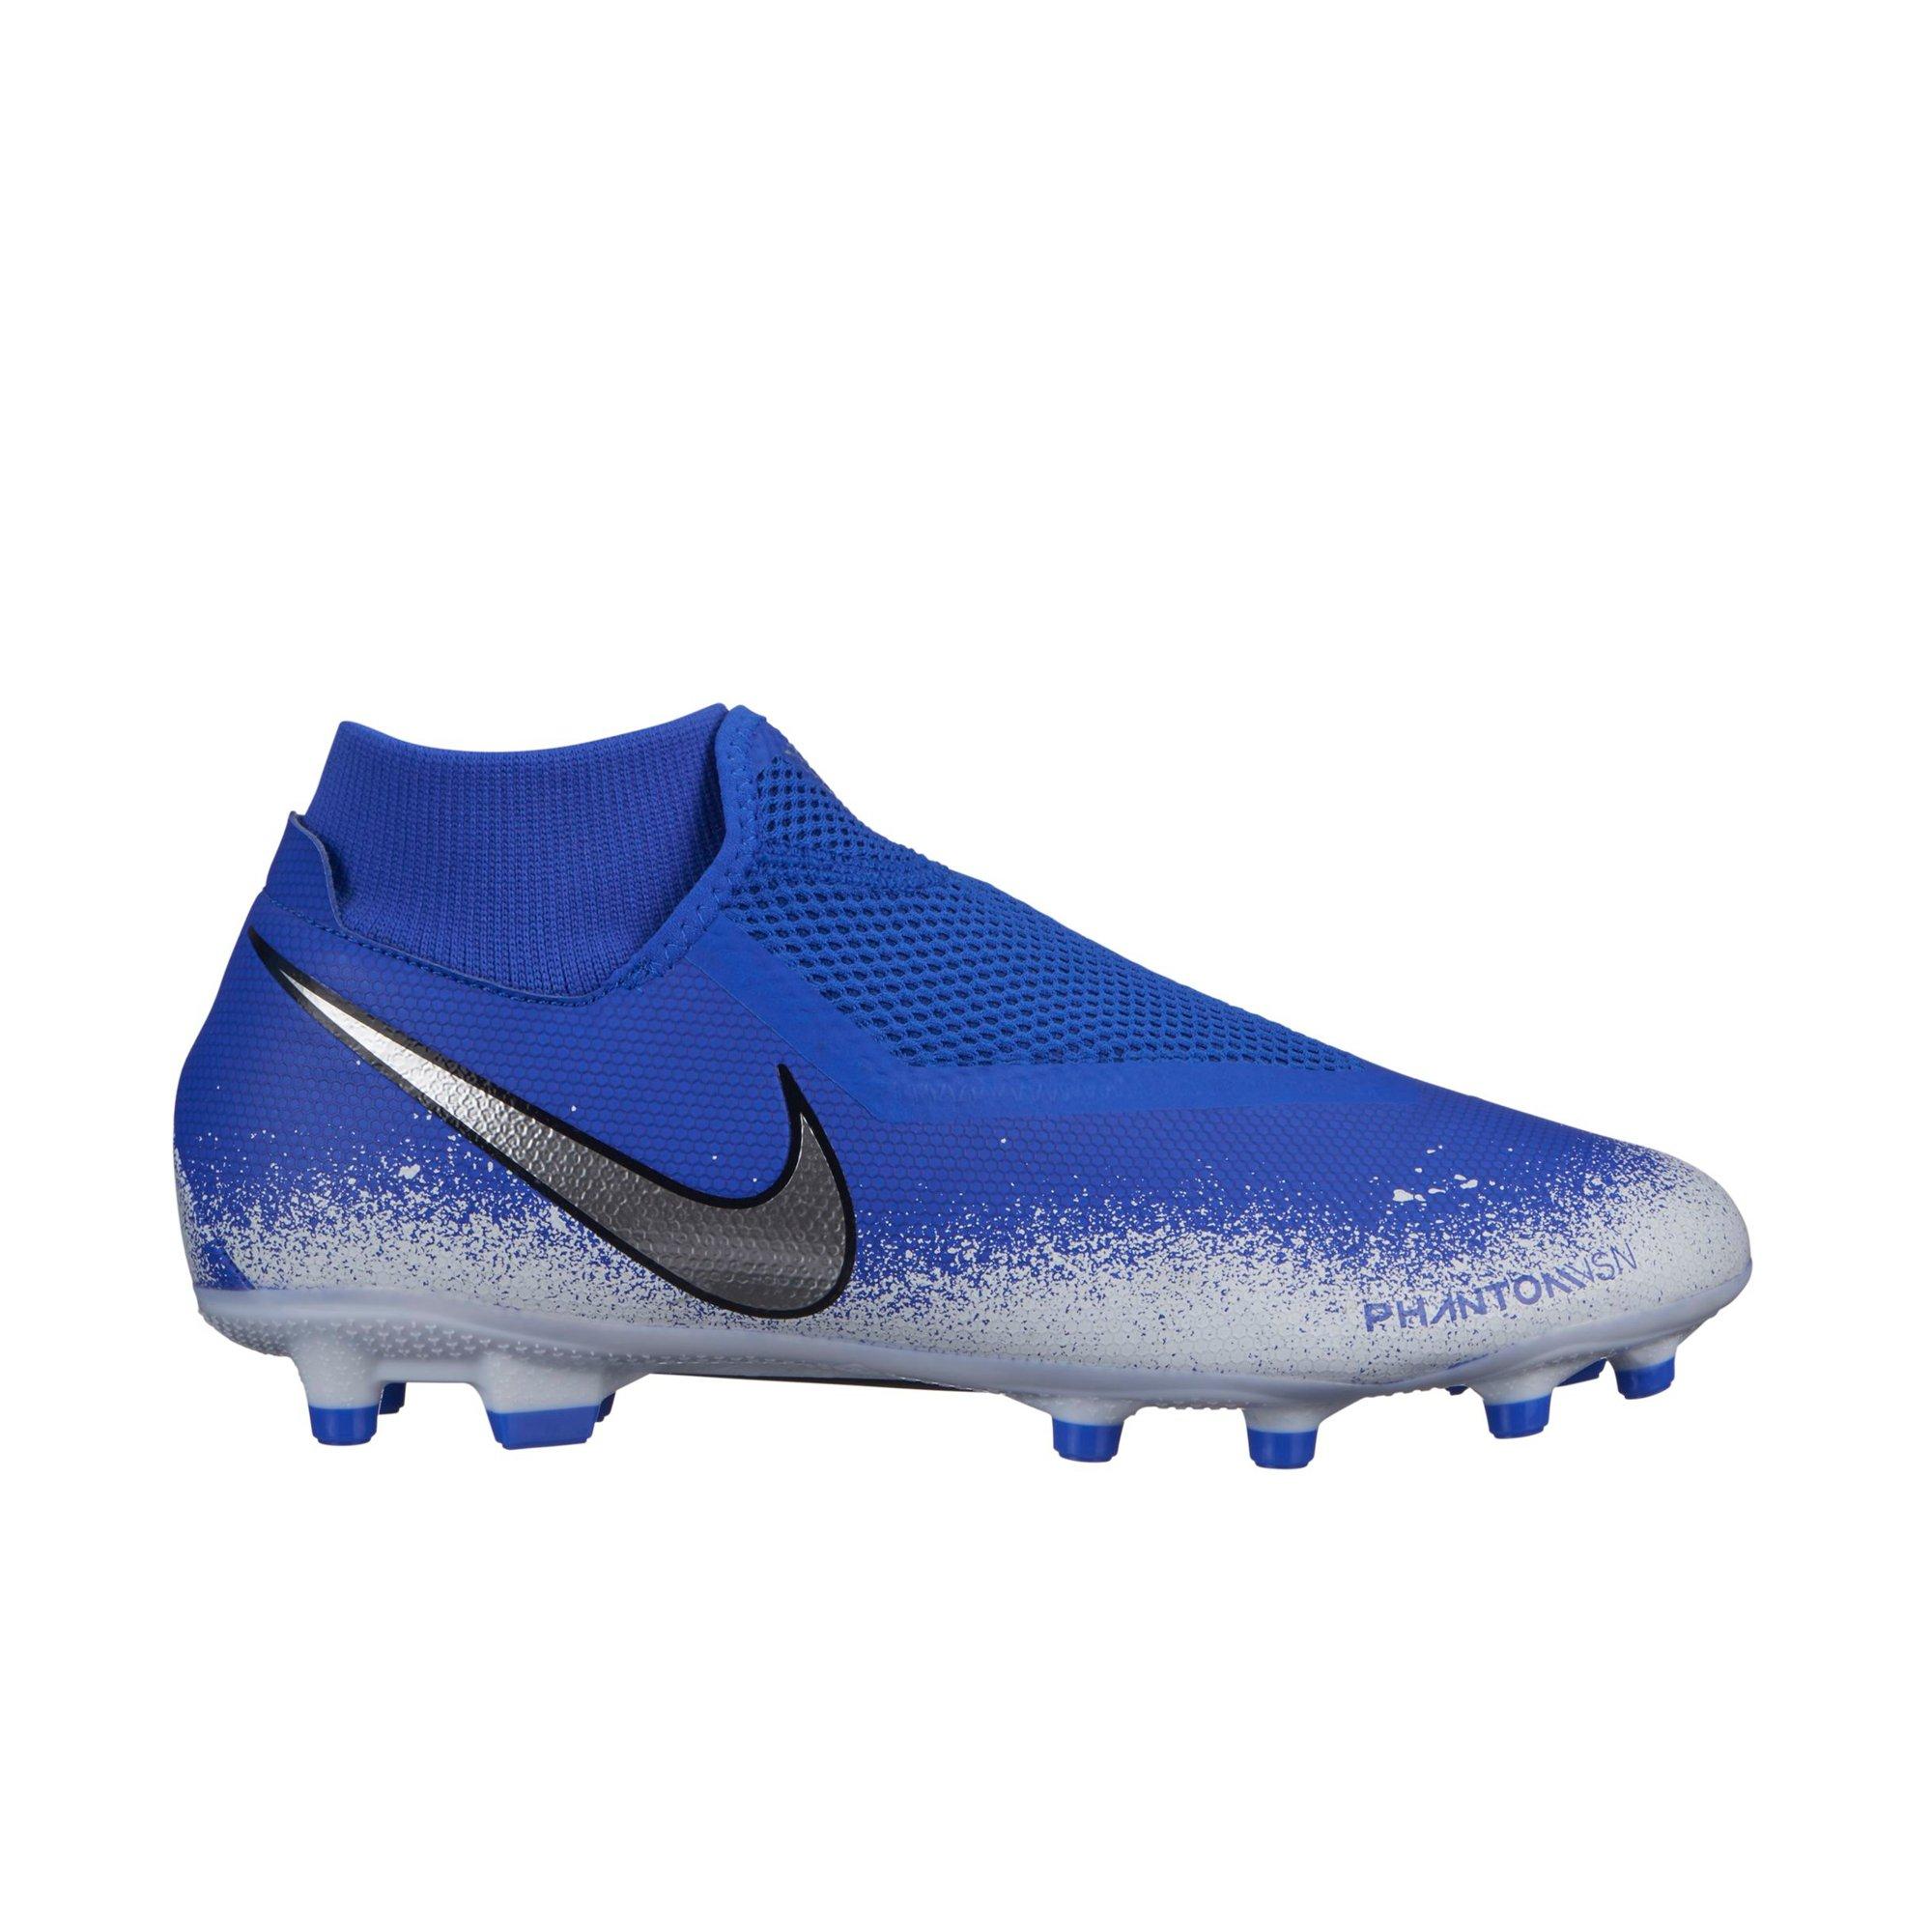 blue and white nike cleats